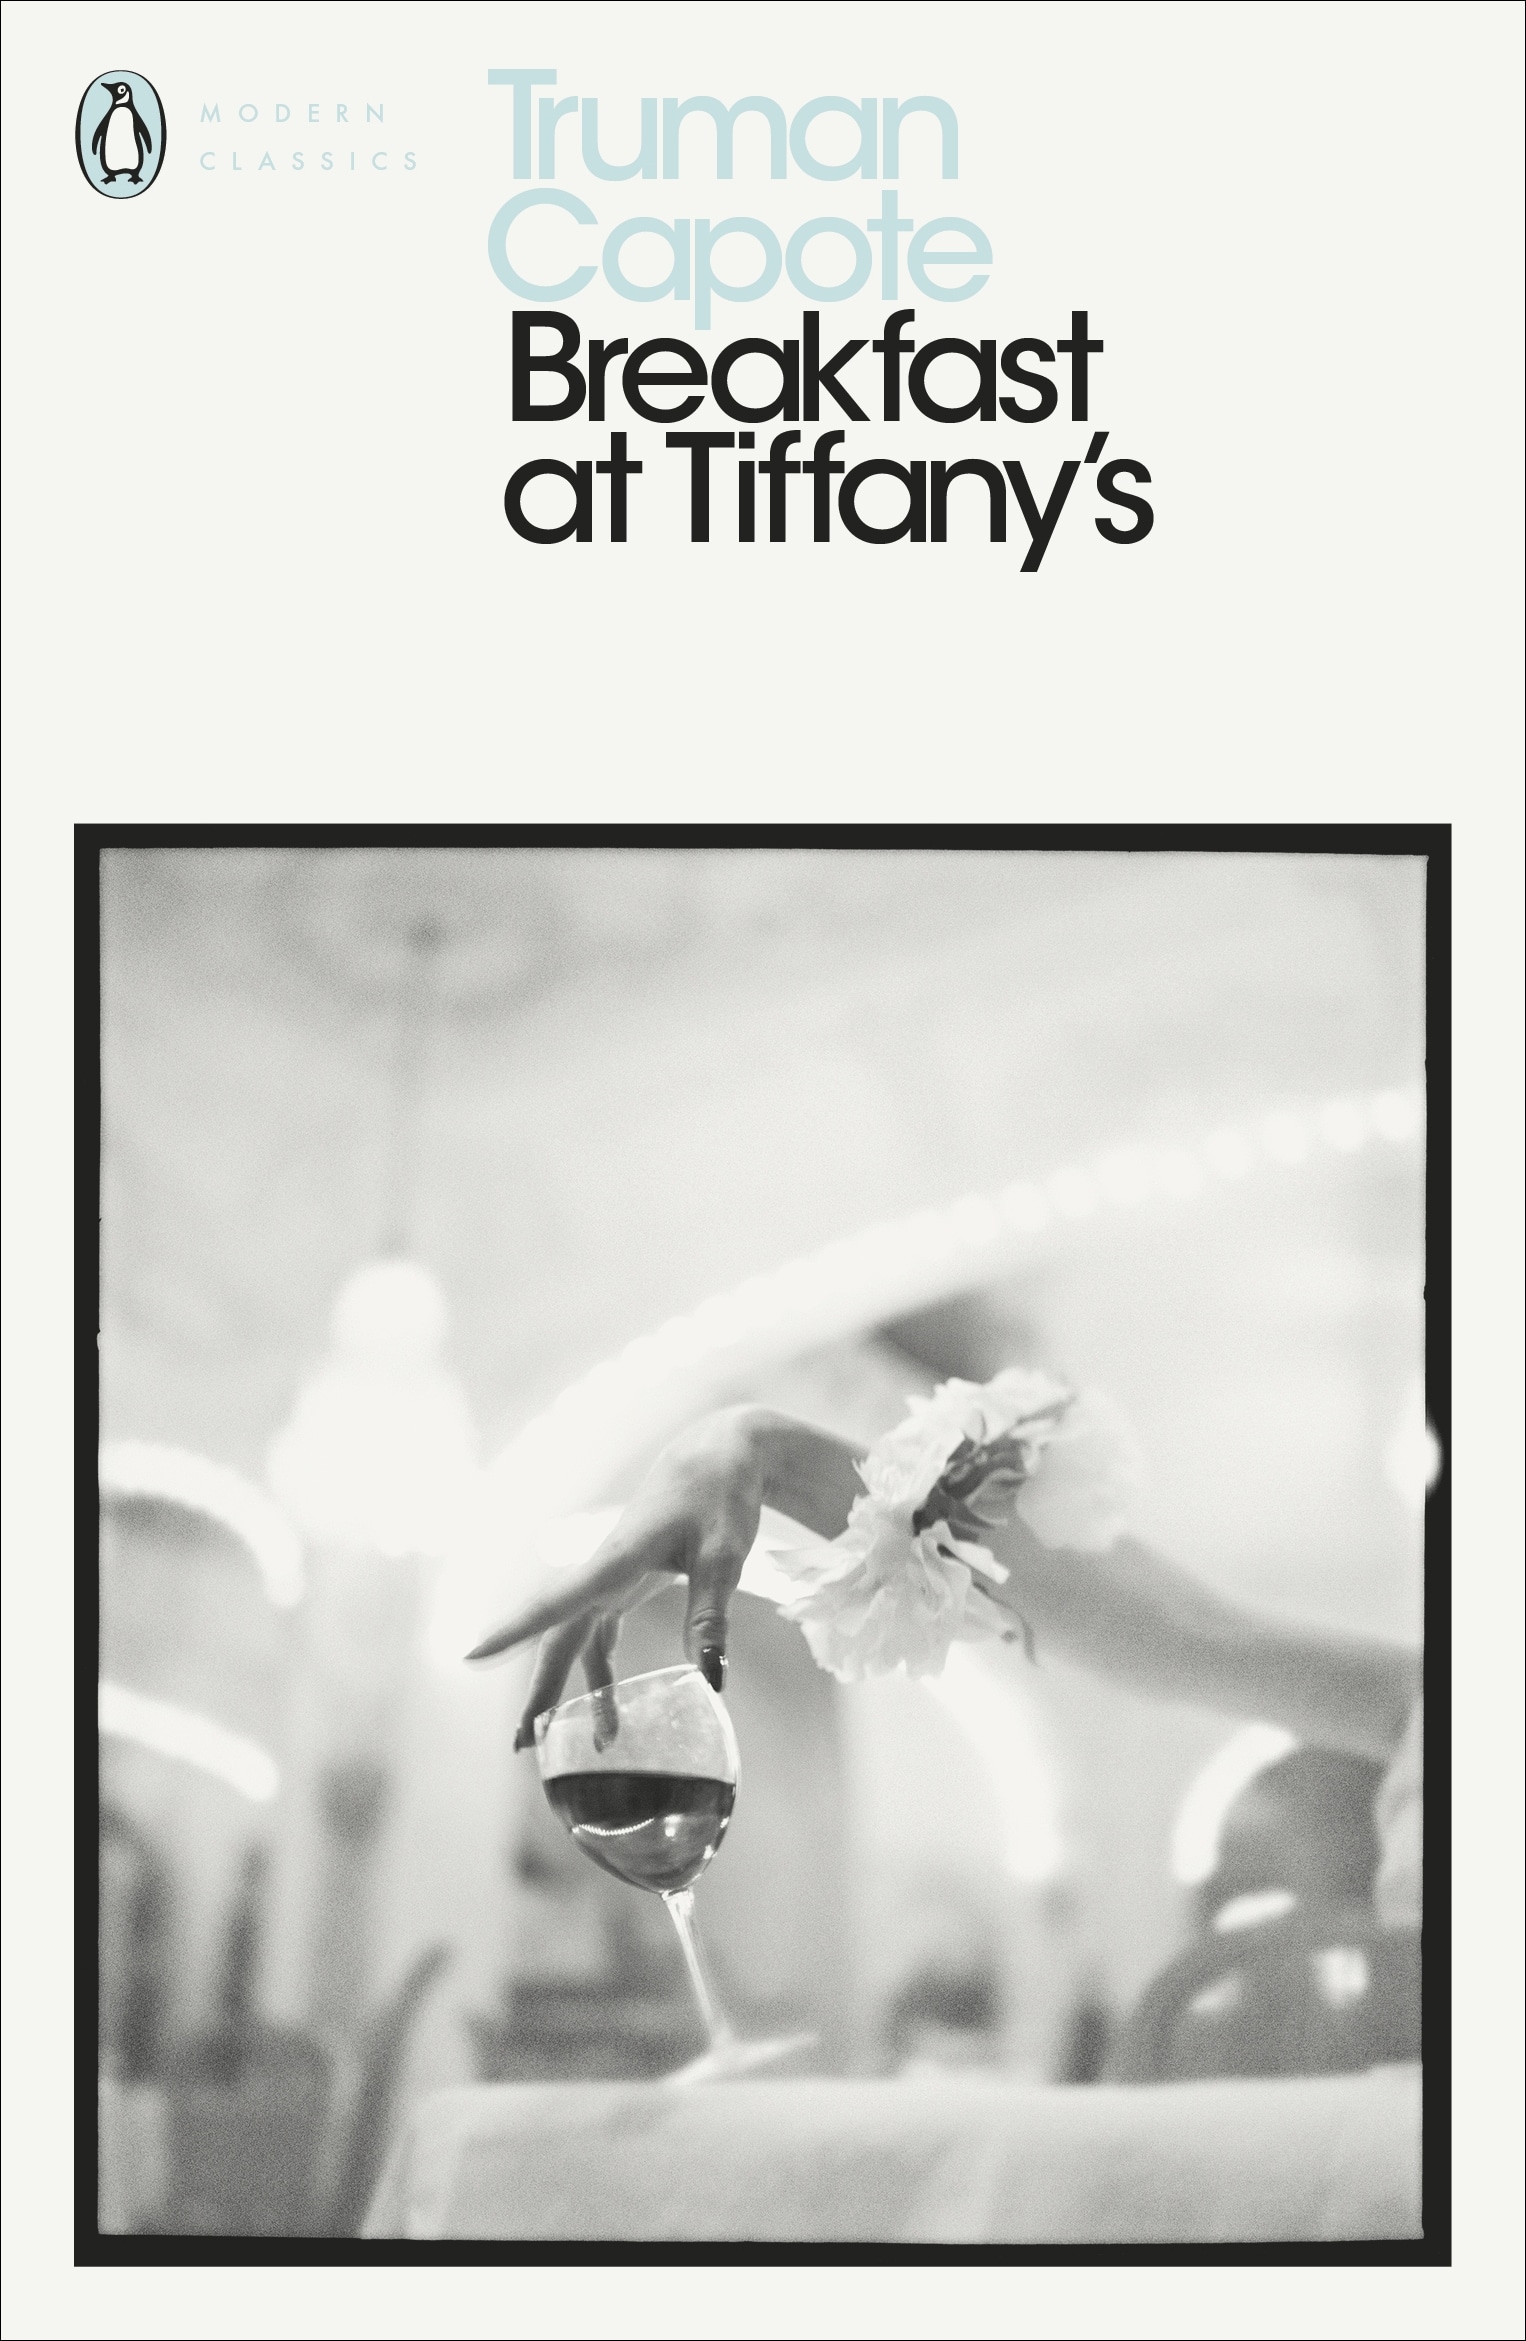 Book “Breakfast at Tiffany's” by Truman Capote — April 27, 2000